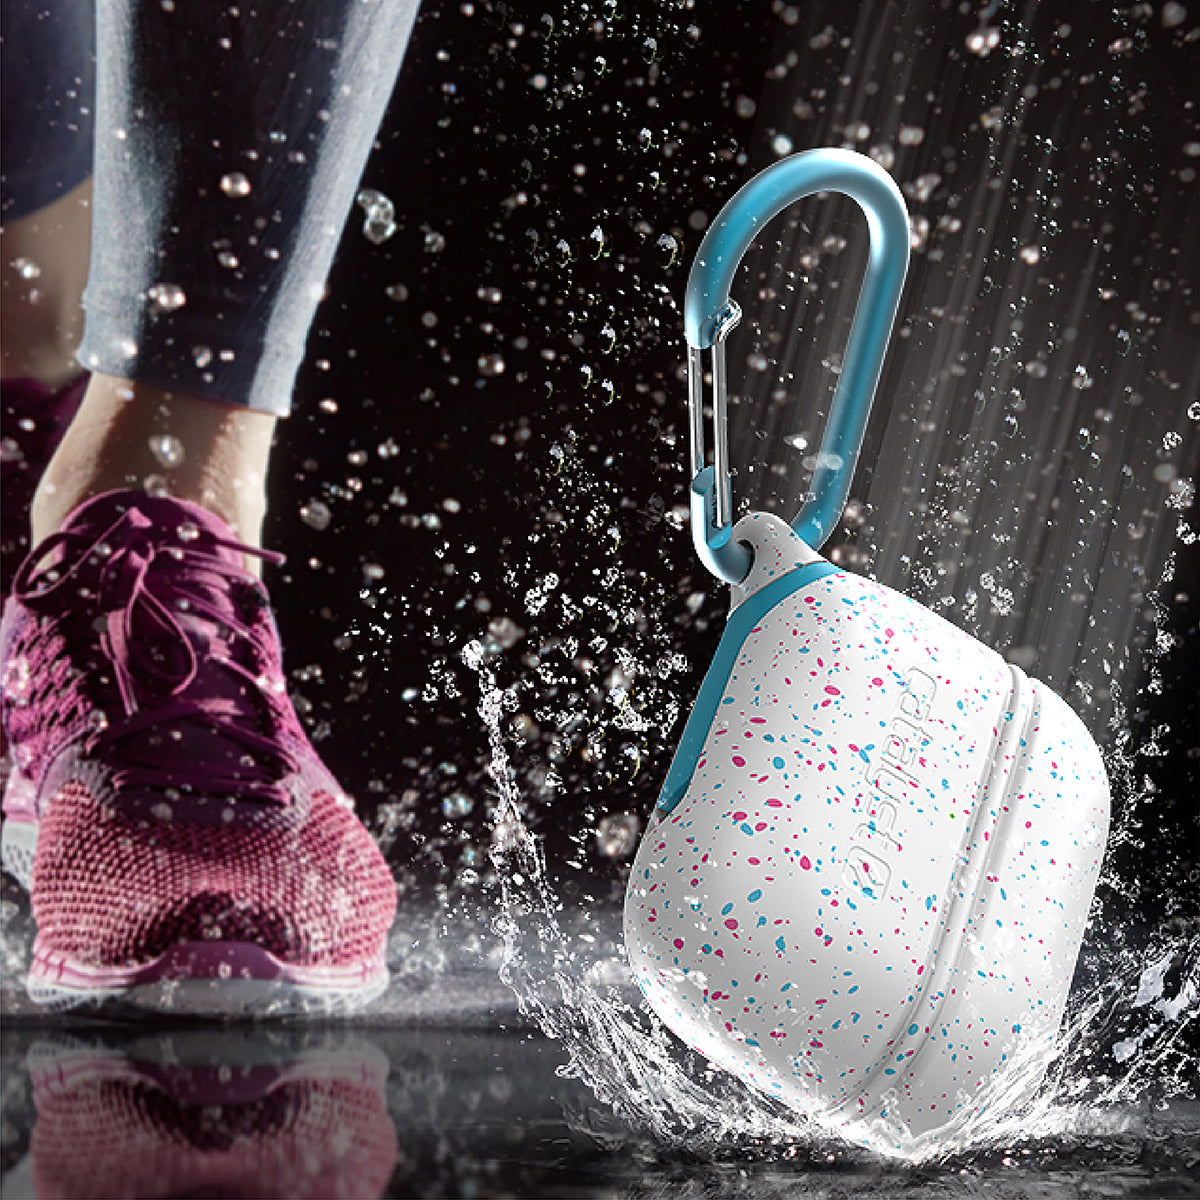 CATAPLAPDPROFUN | catalyst airpods pro gen 2 1 waterproof case carabiner special edition funfetti dropped and splashes of water running shoes